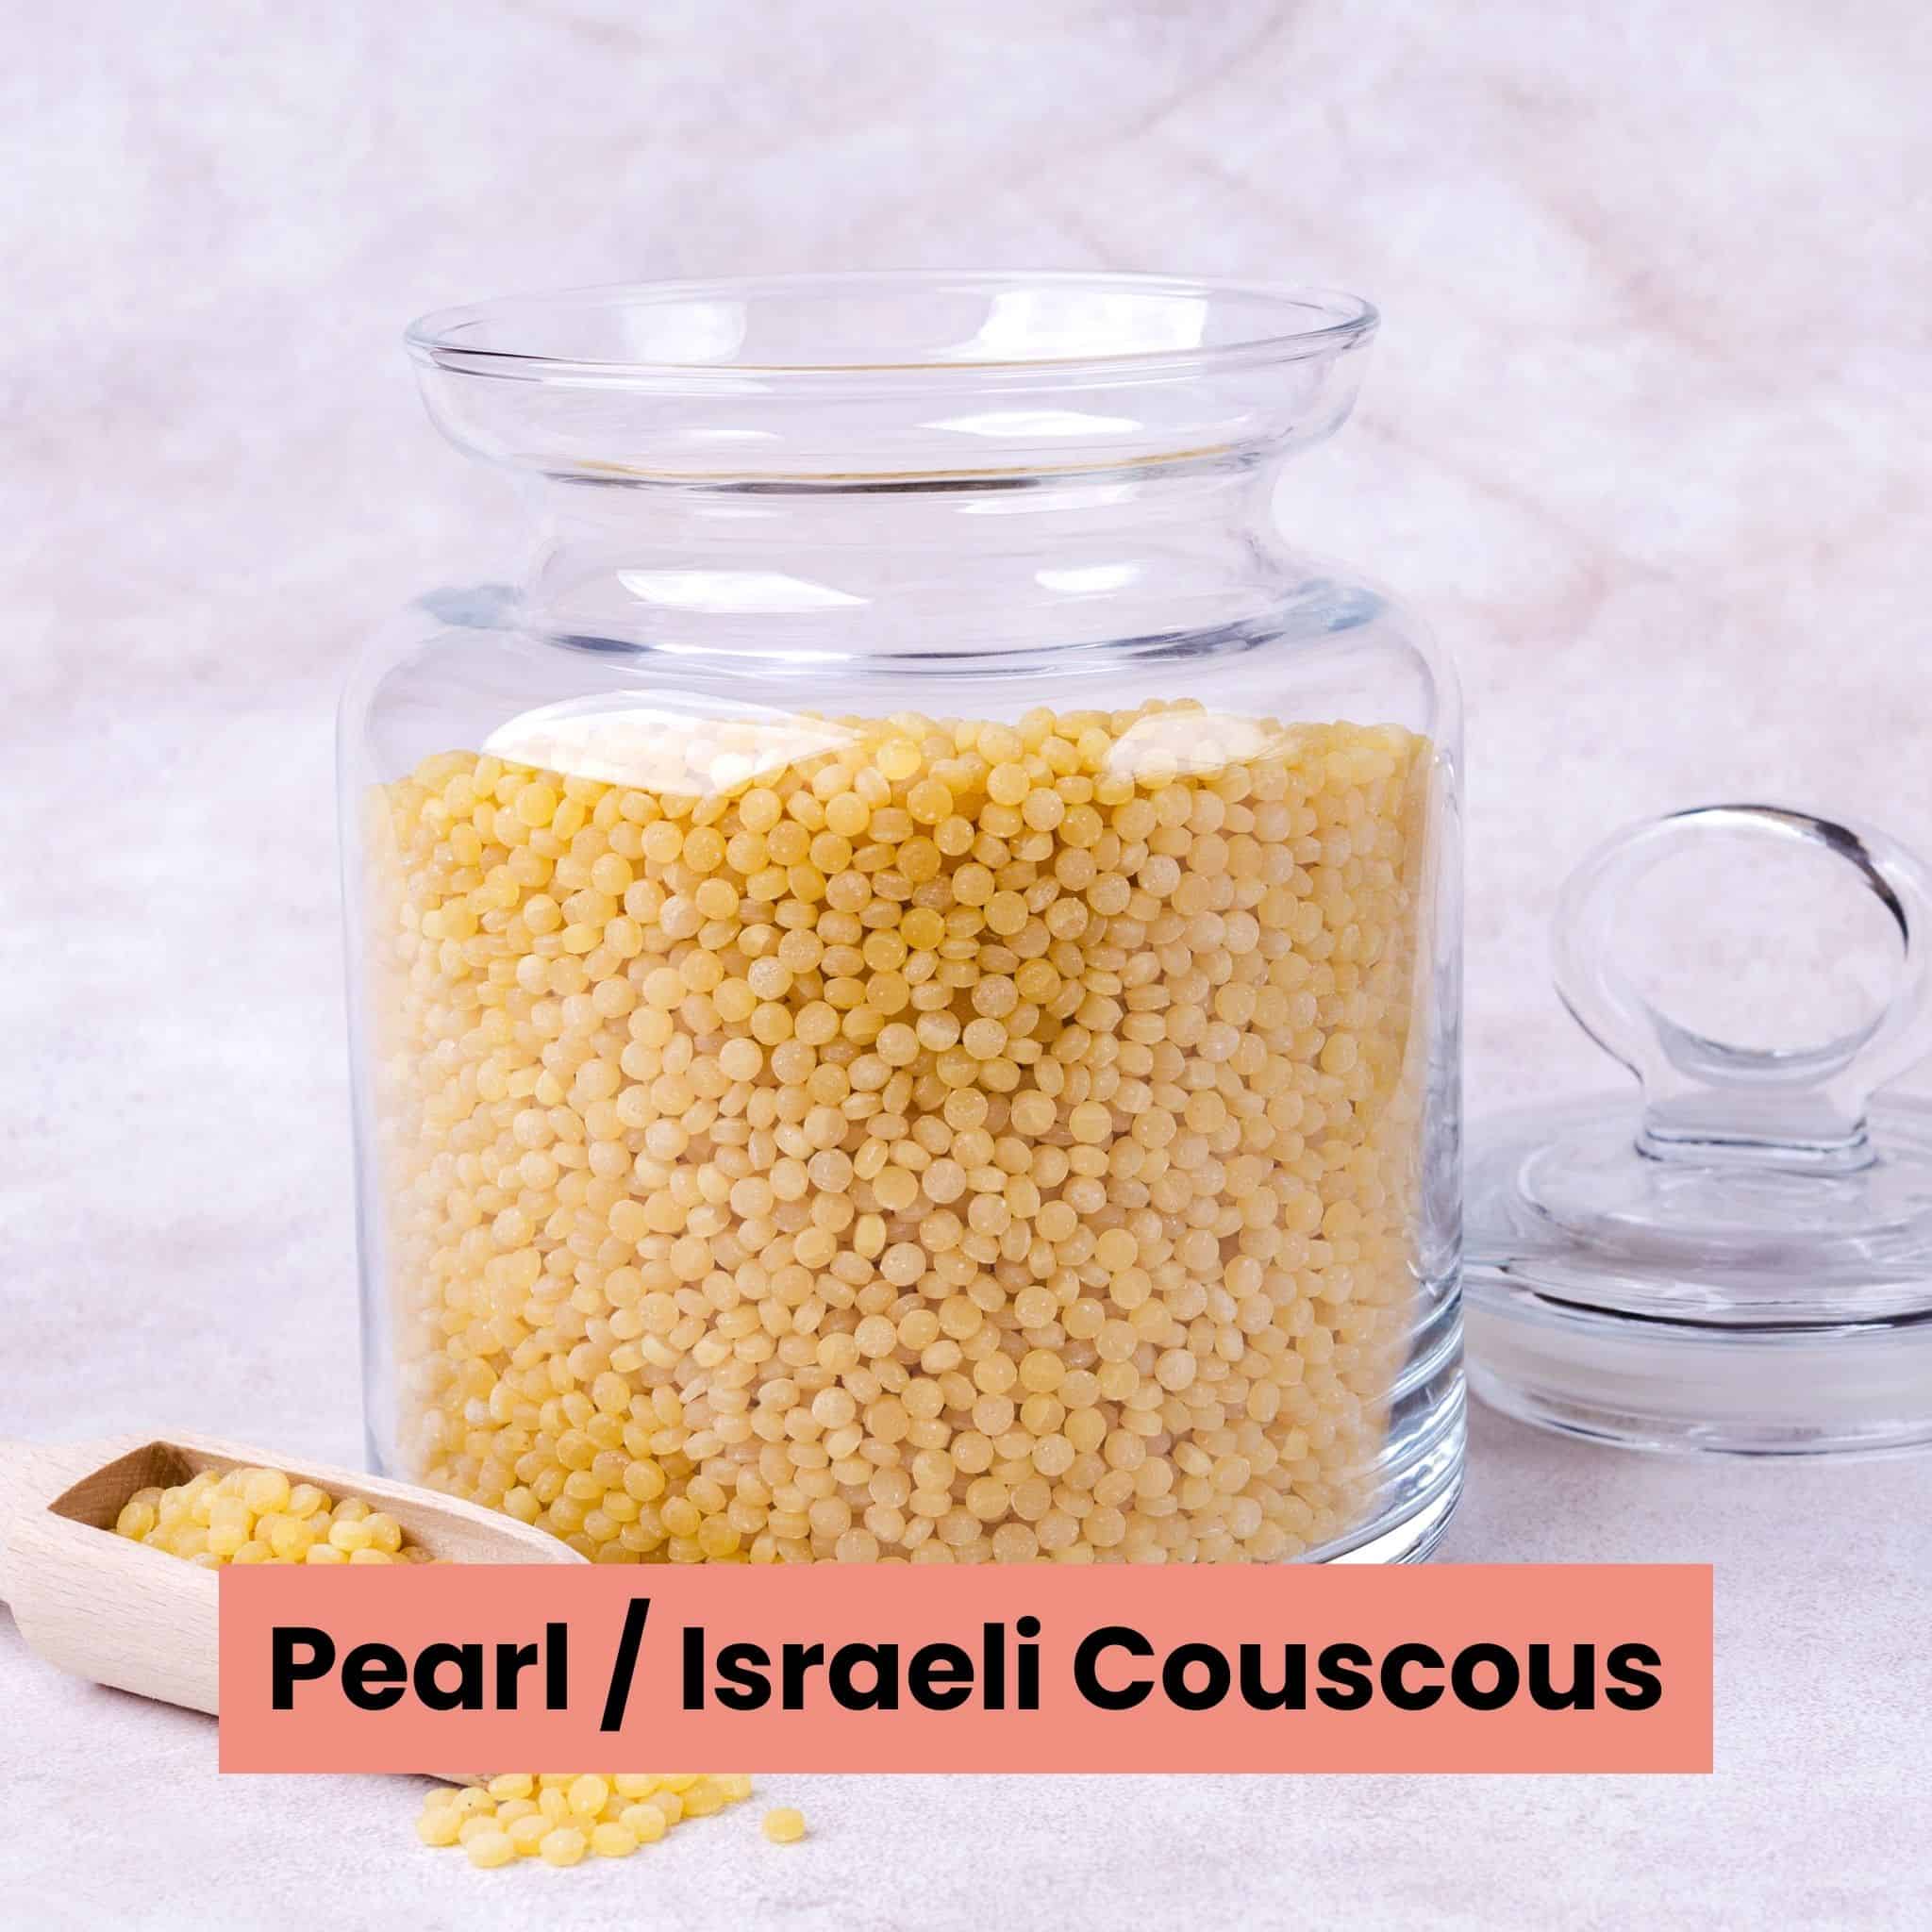 Israeli couscous also known as pearl couscous in a glass jar next to a scoop with more couscous next to it.